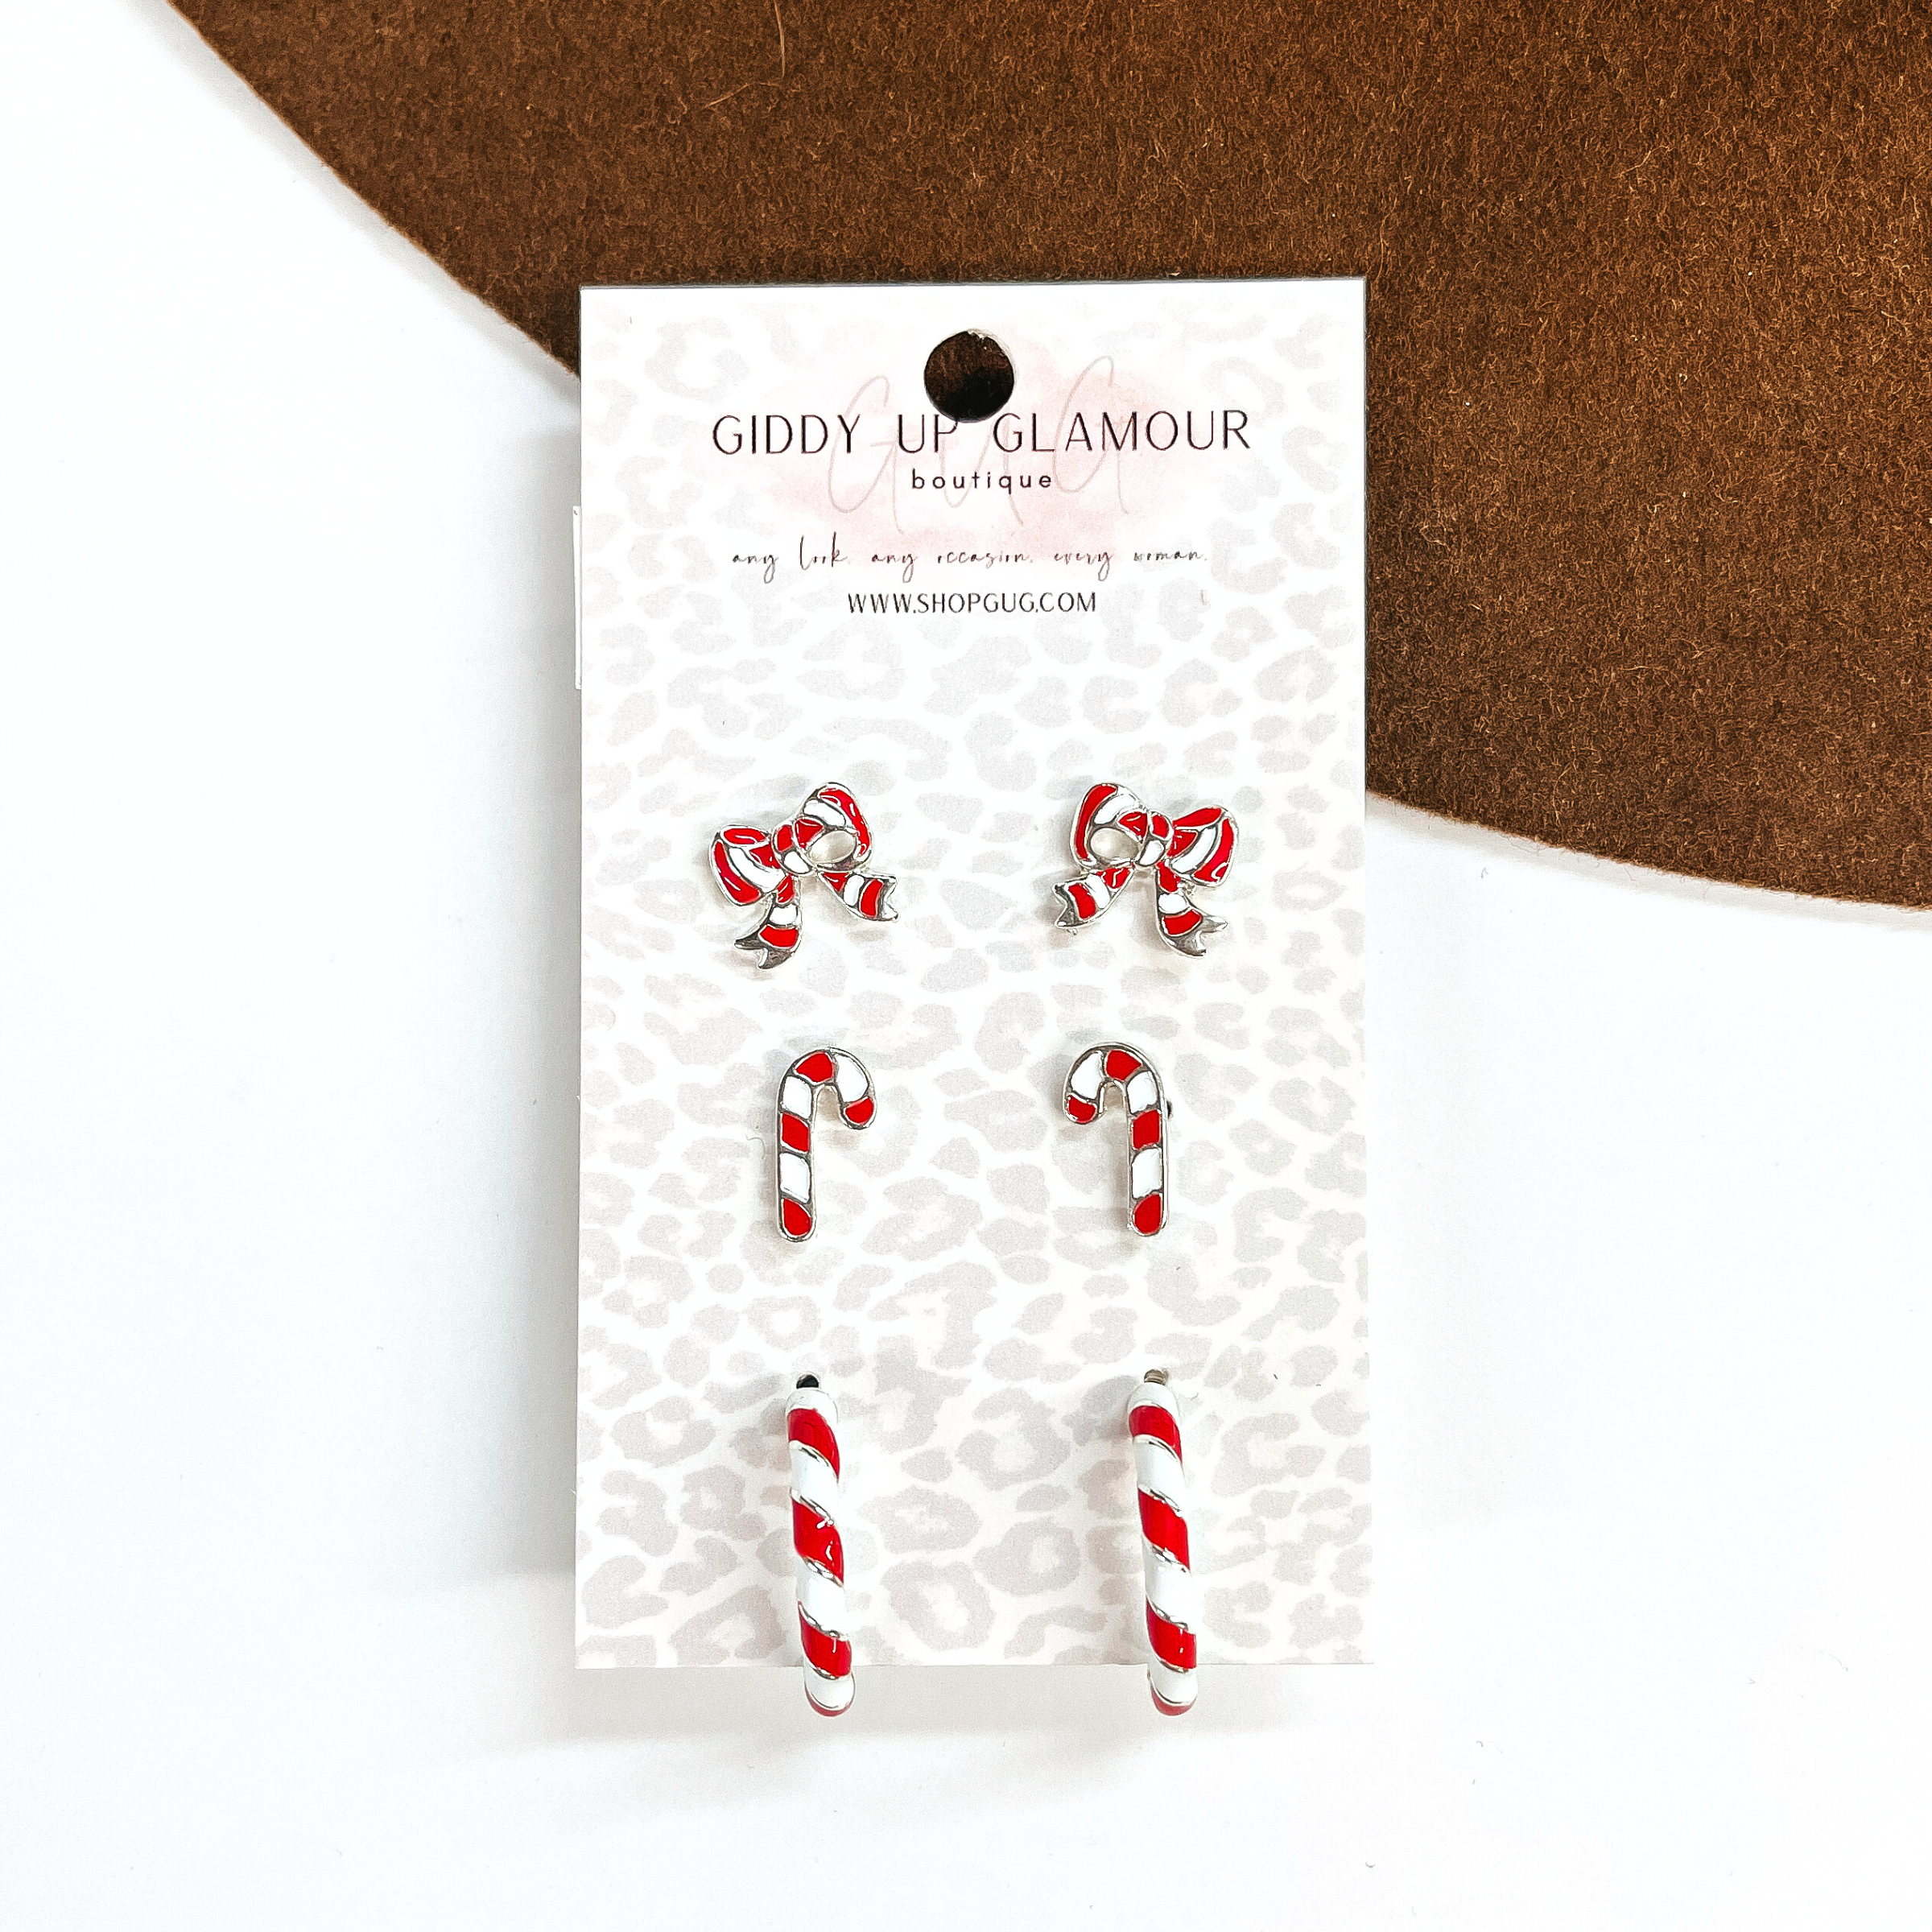 This is a set of three earrings in red and white in a silver setting. From top to bottom; bows, candy canes, and hoops. This earrings are placed in a Giddy Up Glamour card holder. This earring set is taken on a white background and on a dark brown felt hat brim.